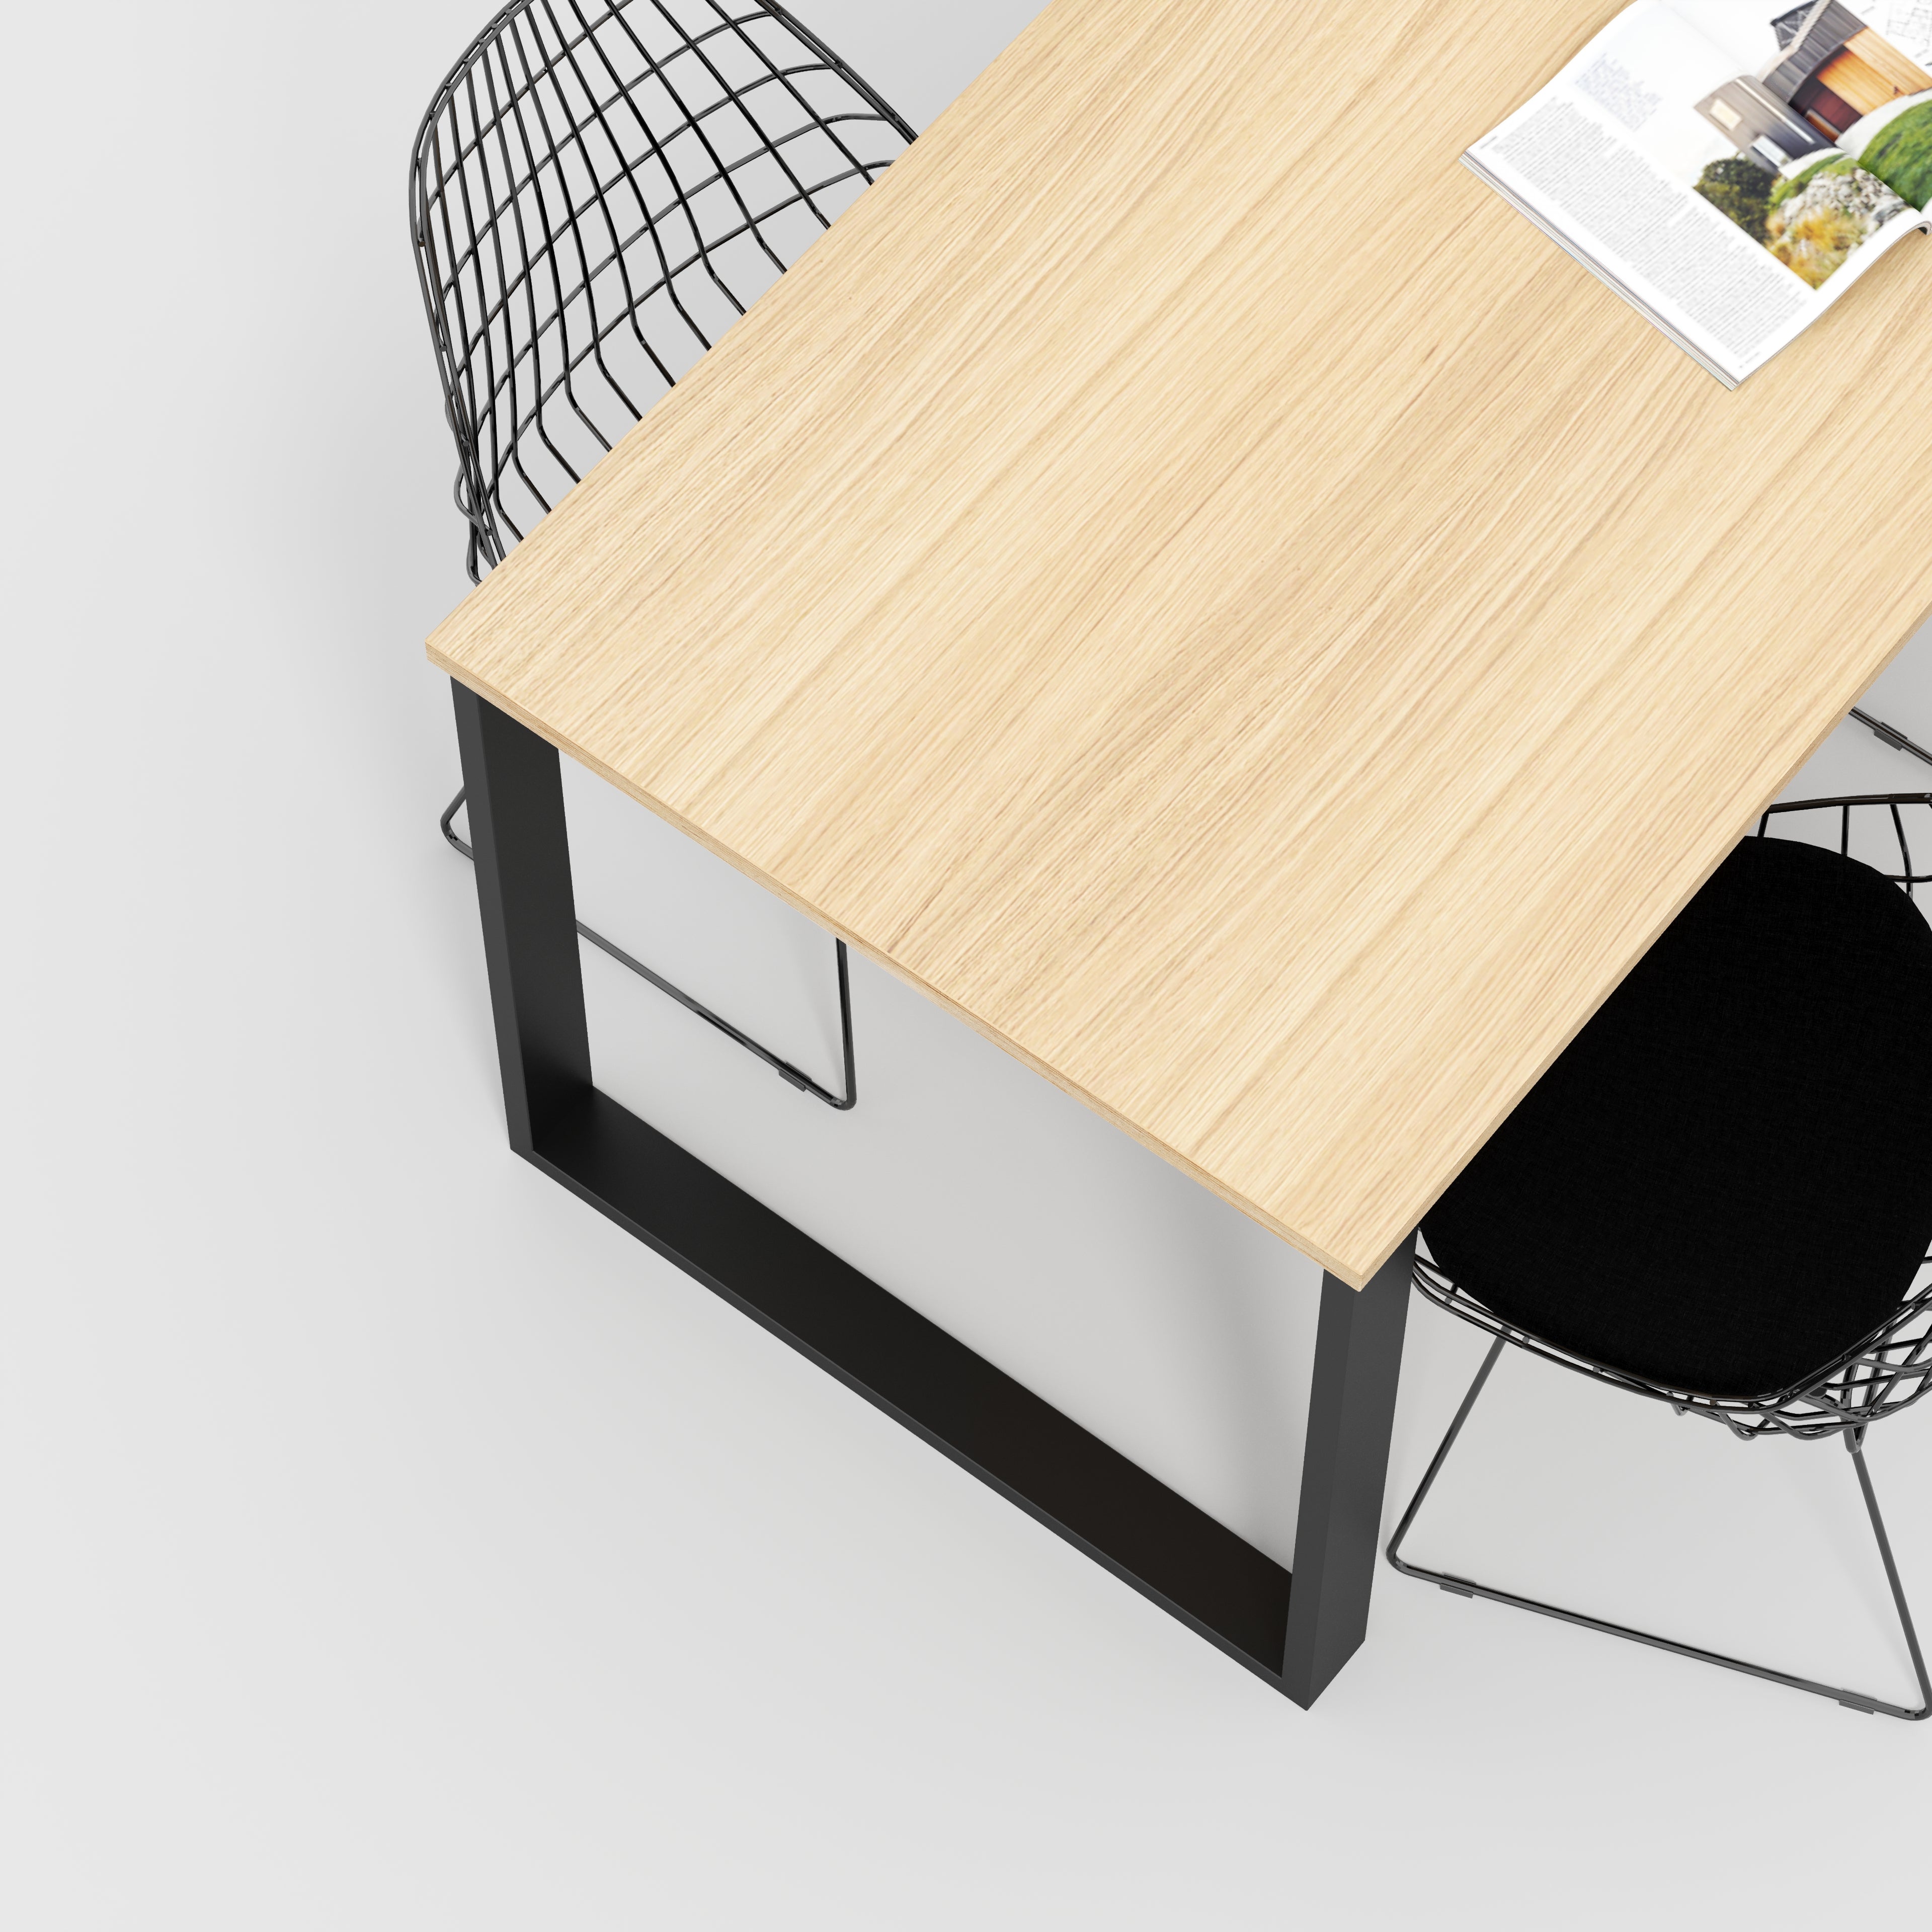 Table with Black Industrial Legs - Plywood Oak - 1600(w) x 800(d)